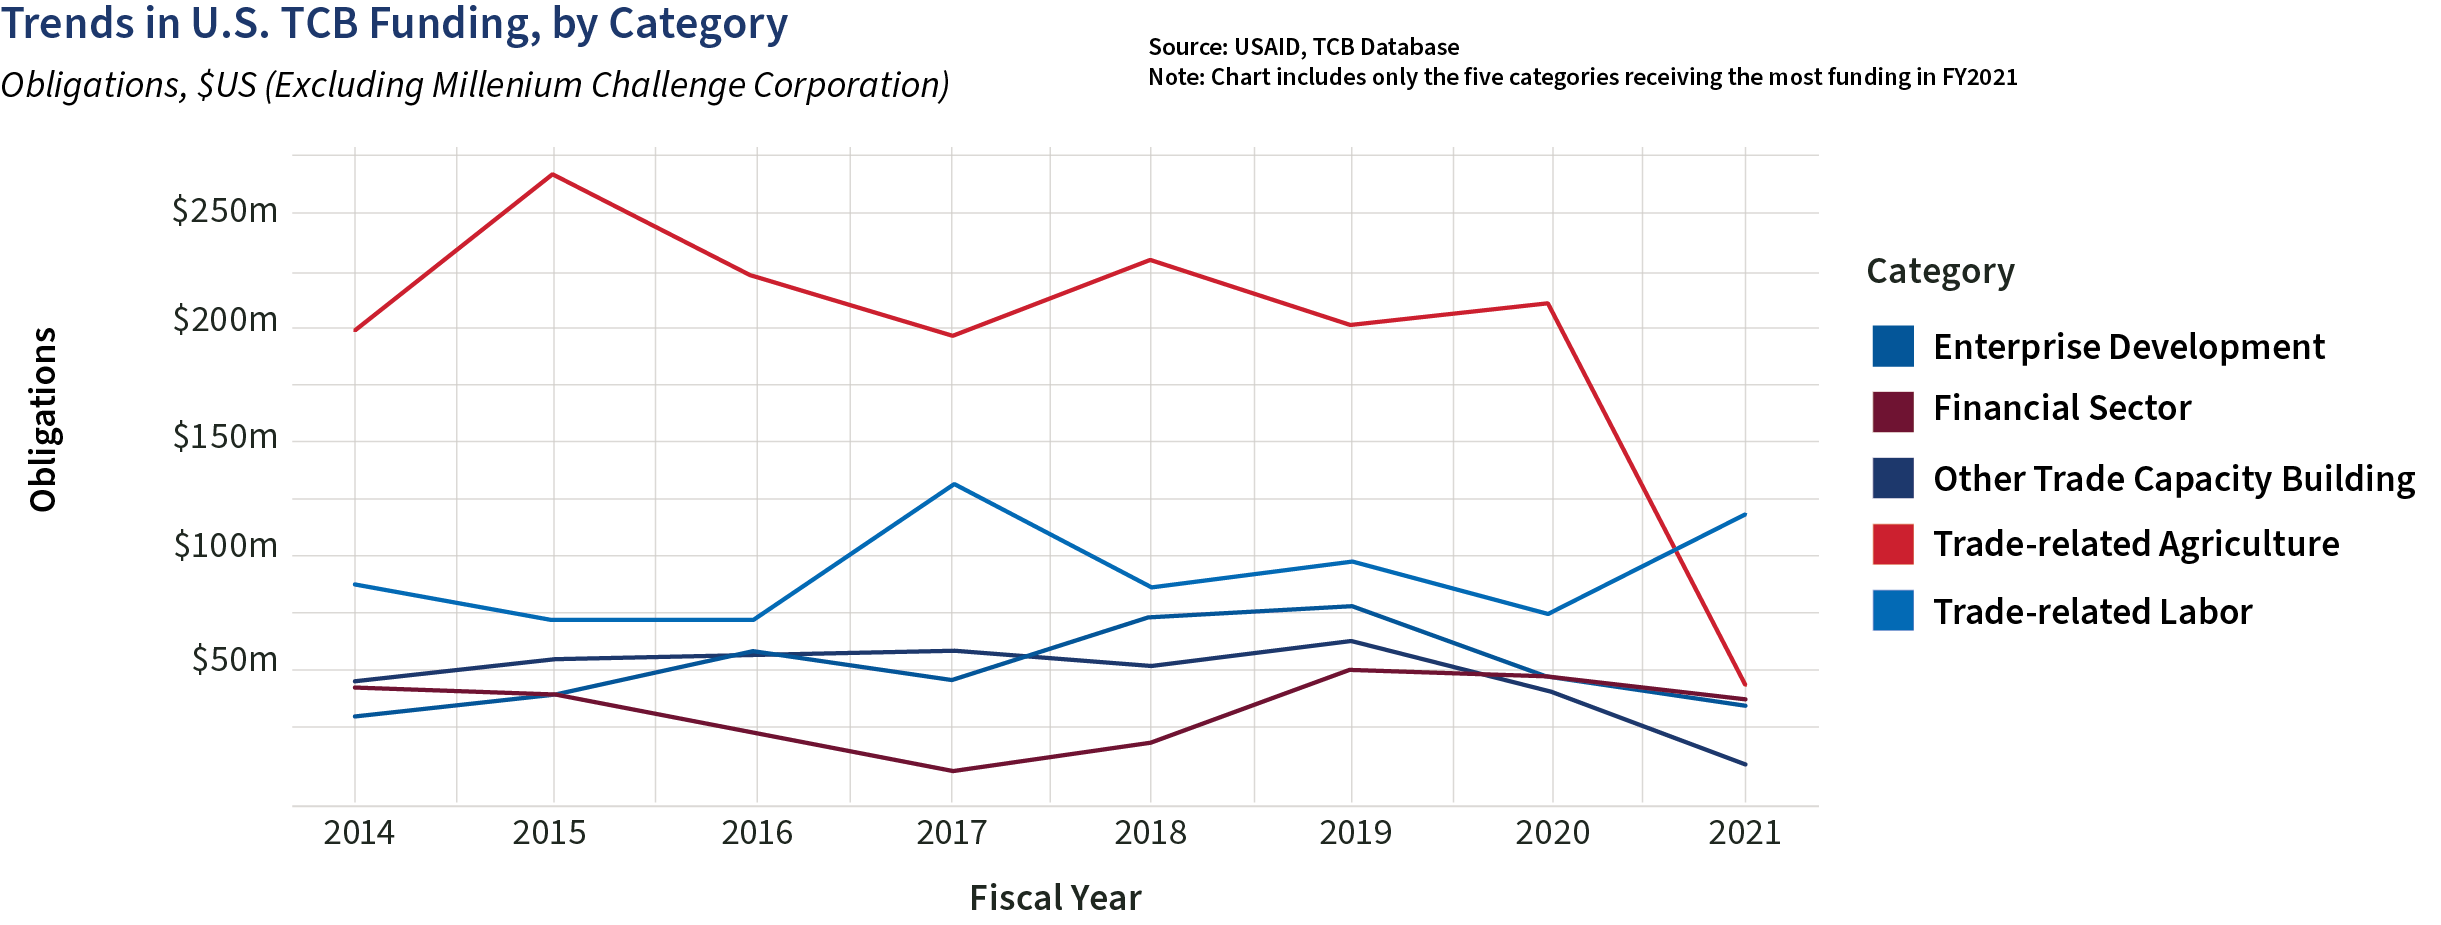 Line graph of trends in US trade capacity building funding by category in USD